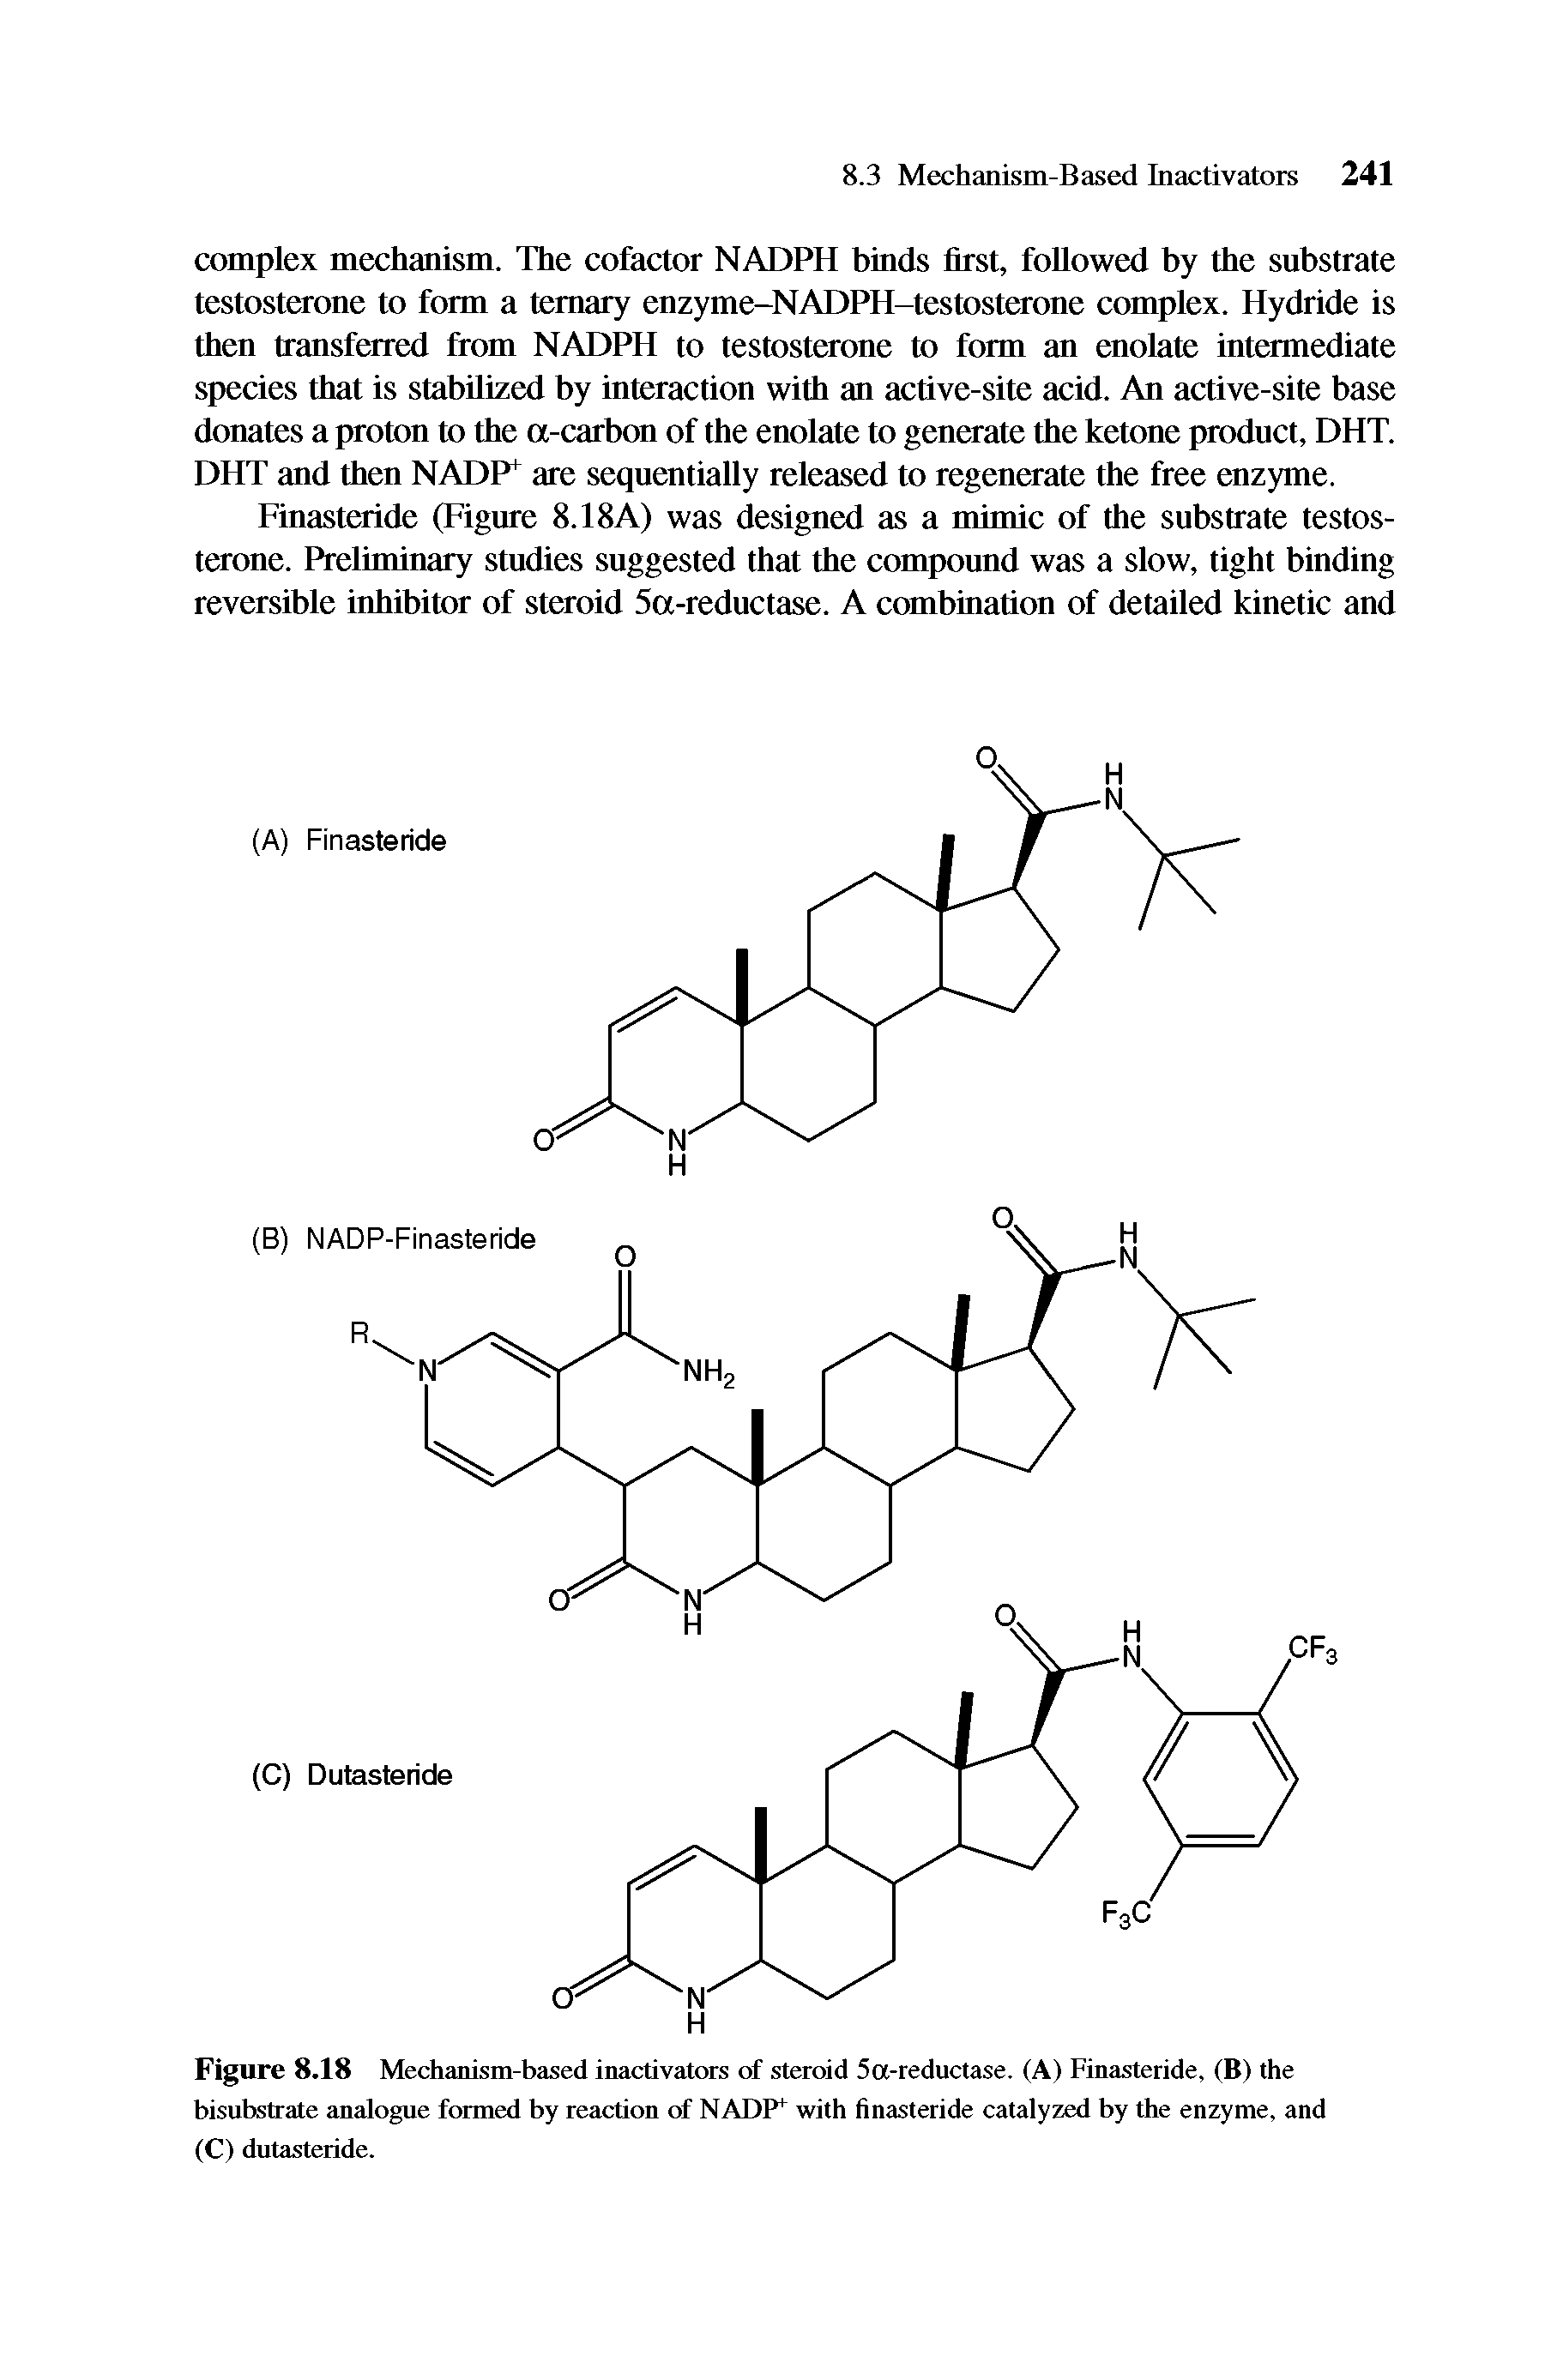 Figure 8.18 Mechanism-based inactivators of steroid 5a-reductase. (A) Finasteride, (B) the bisubstrate analogue formed by reaction of NADP1 with finasteride catalyzed by the enzyme, and (C) dutasteride.